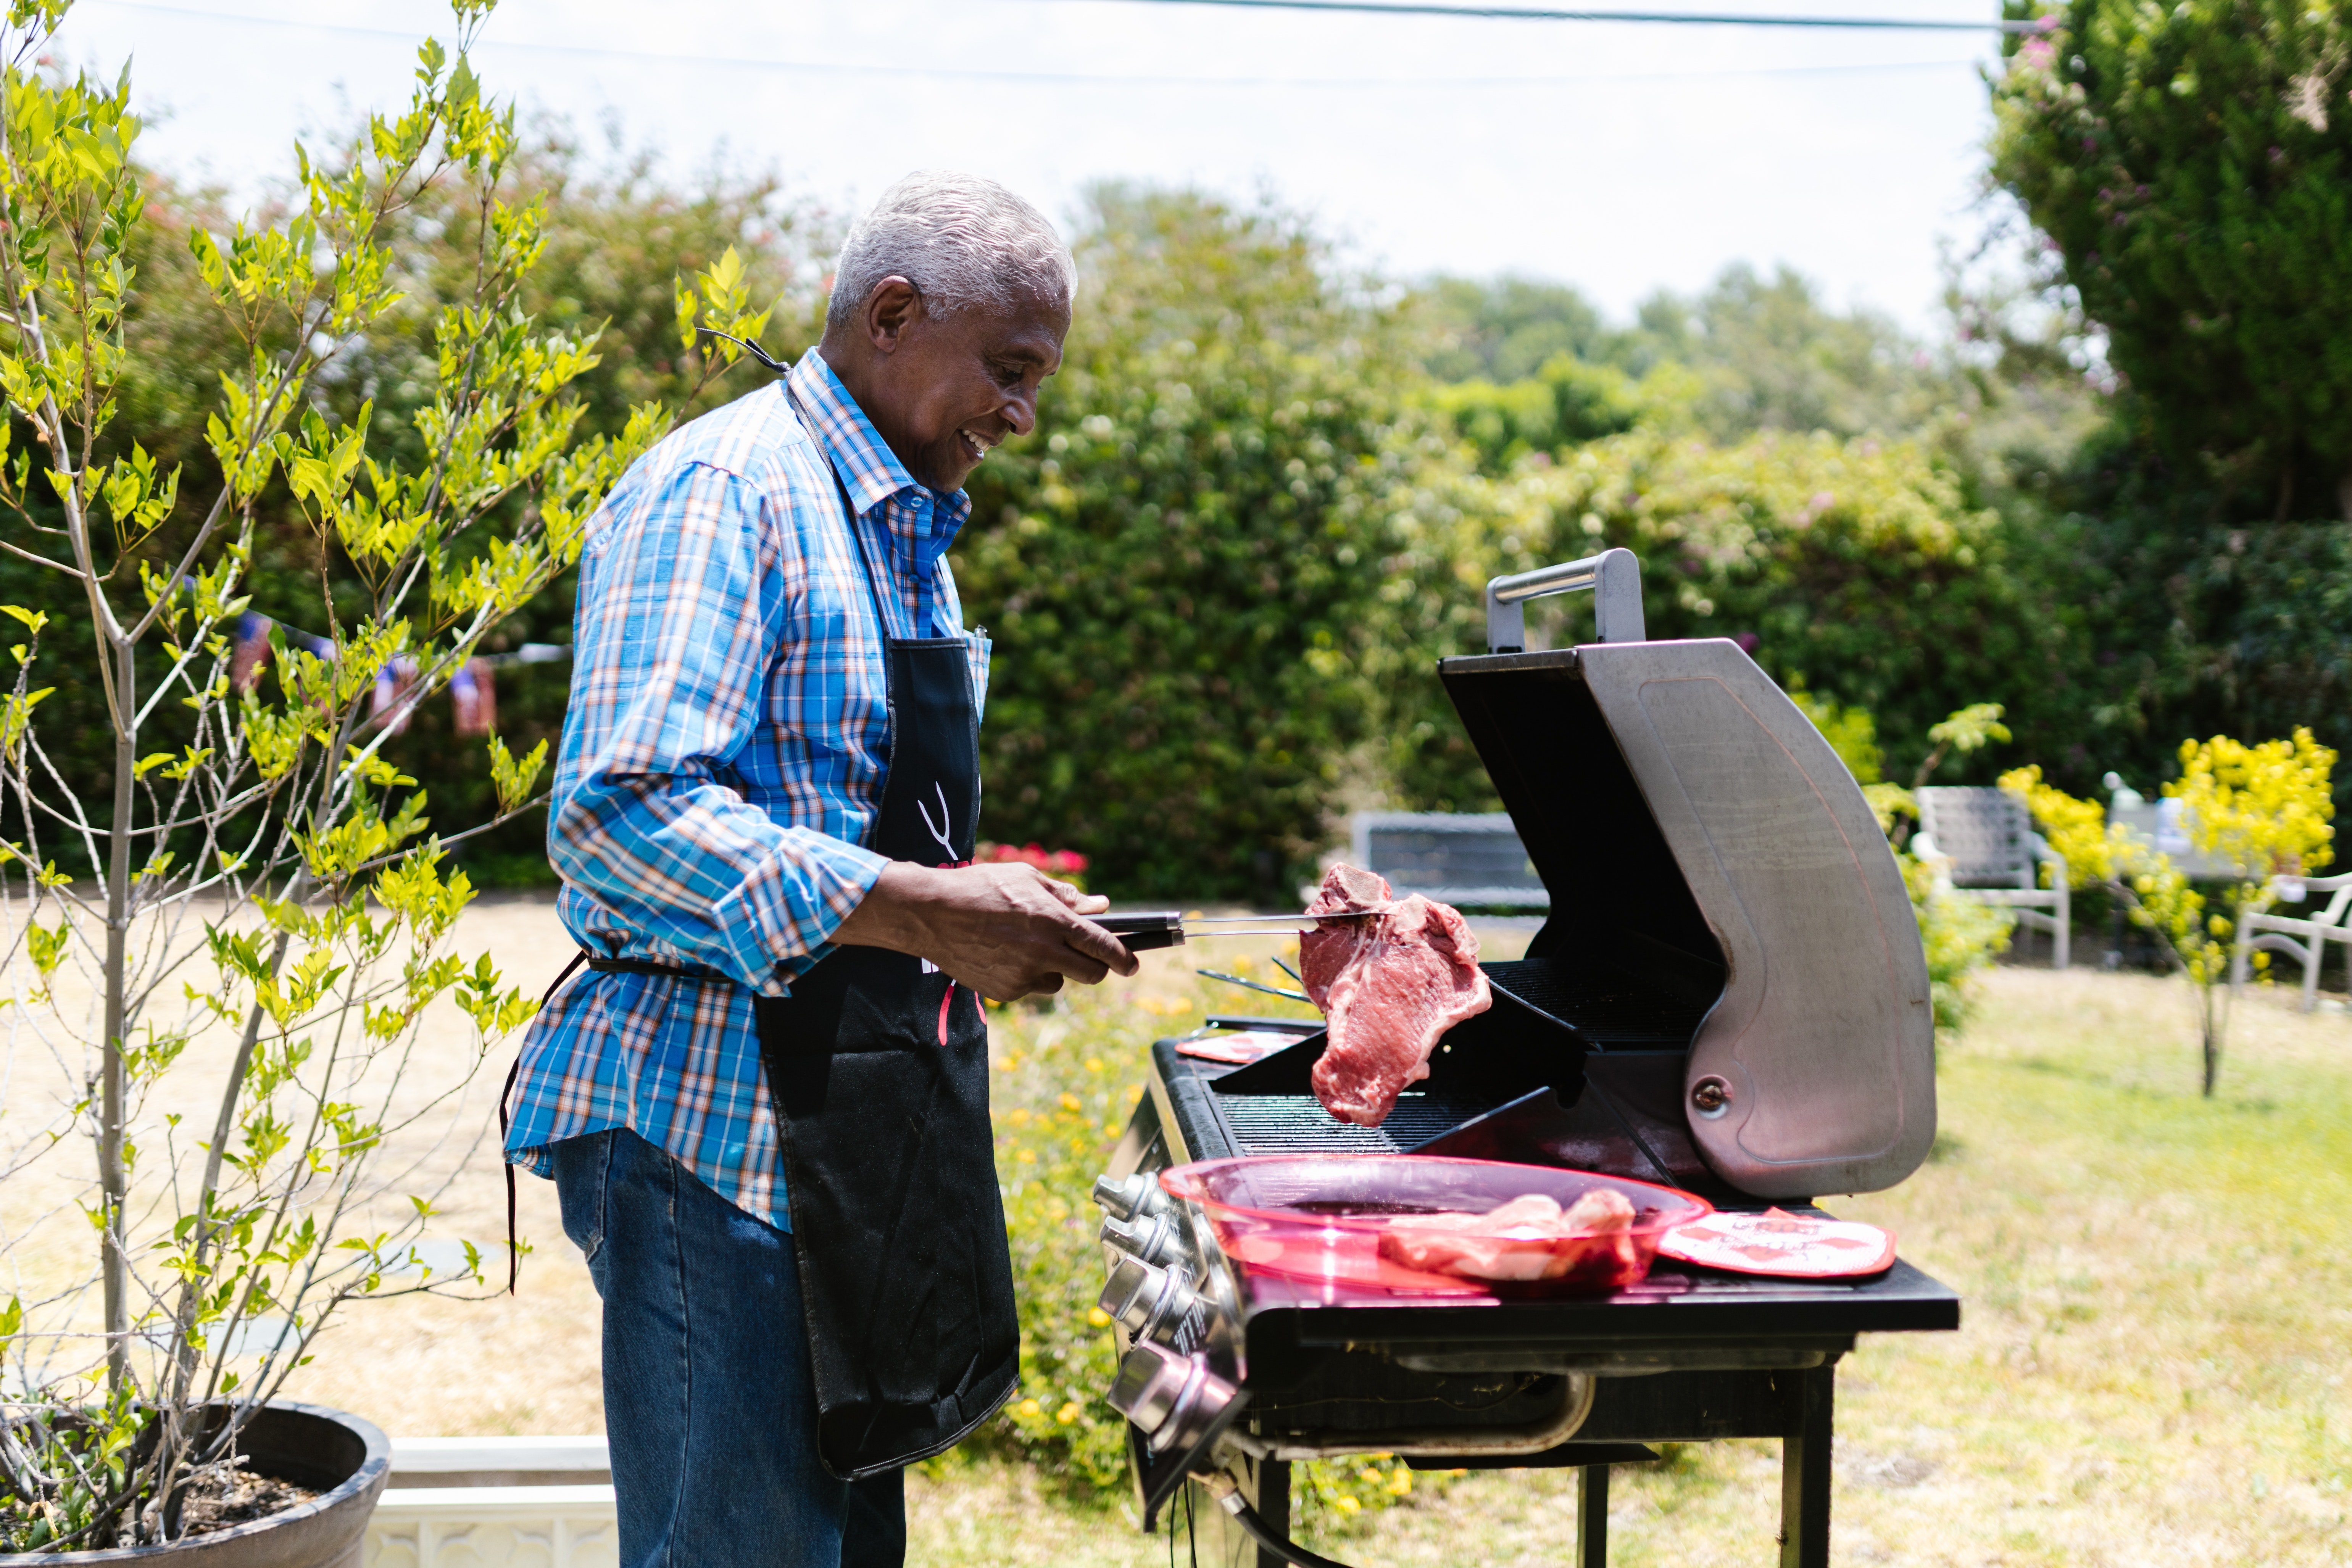 A happy man grilling meat | Photo: Pexels